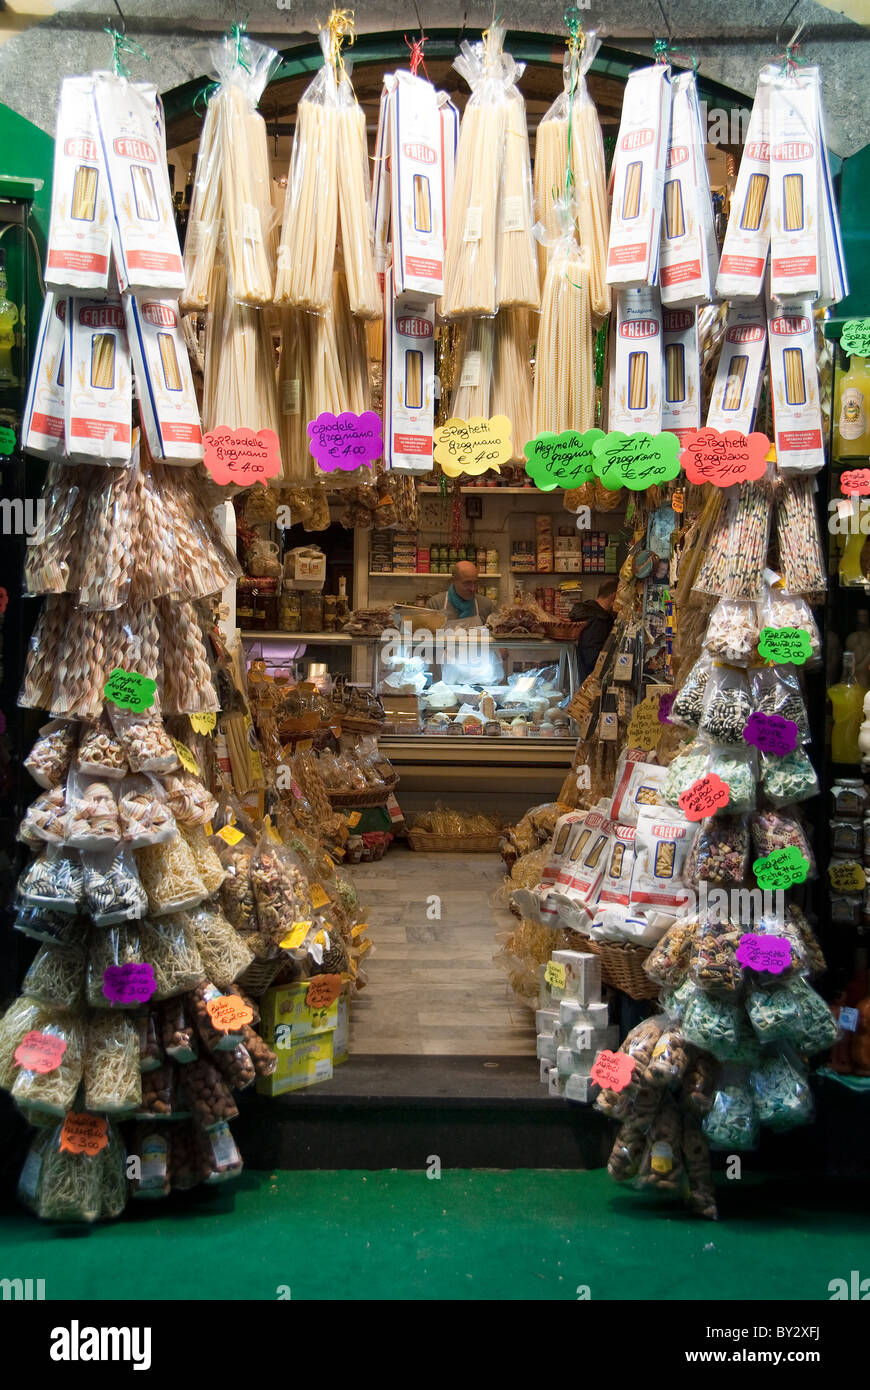 Alimentari or food shop specializing in Pasta in the Spaccanapoli street of Naples, Italy.  The shopkeeper is visible. Stock Photo